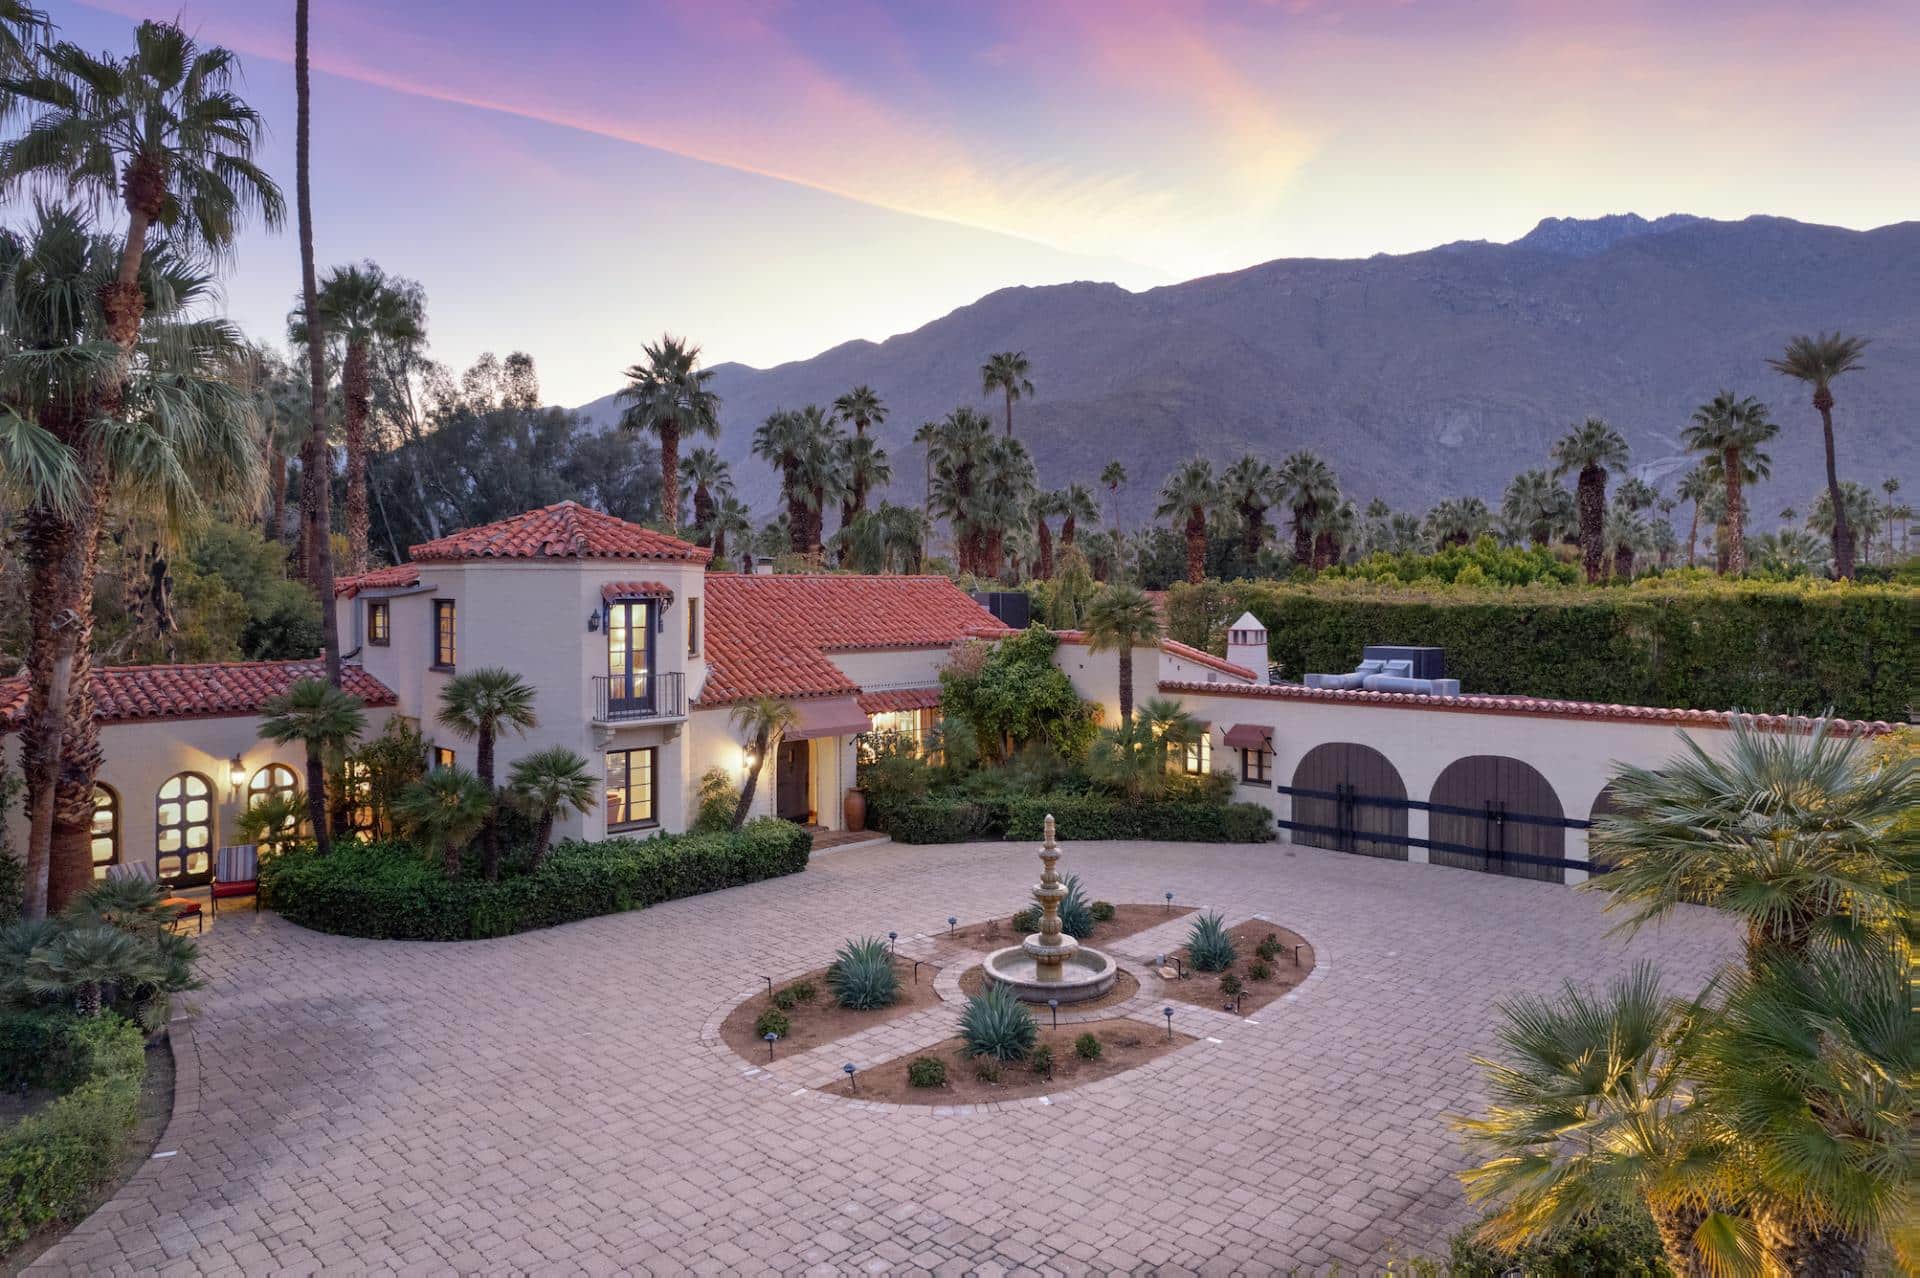 Luxurious Mediterranean-style villa with terracotta roof tiles, surrounded by palm trees, featuring a circular driveway and central water fountain, set against a backdrop of mountains under a twilight sky.